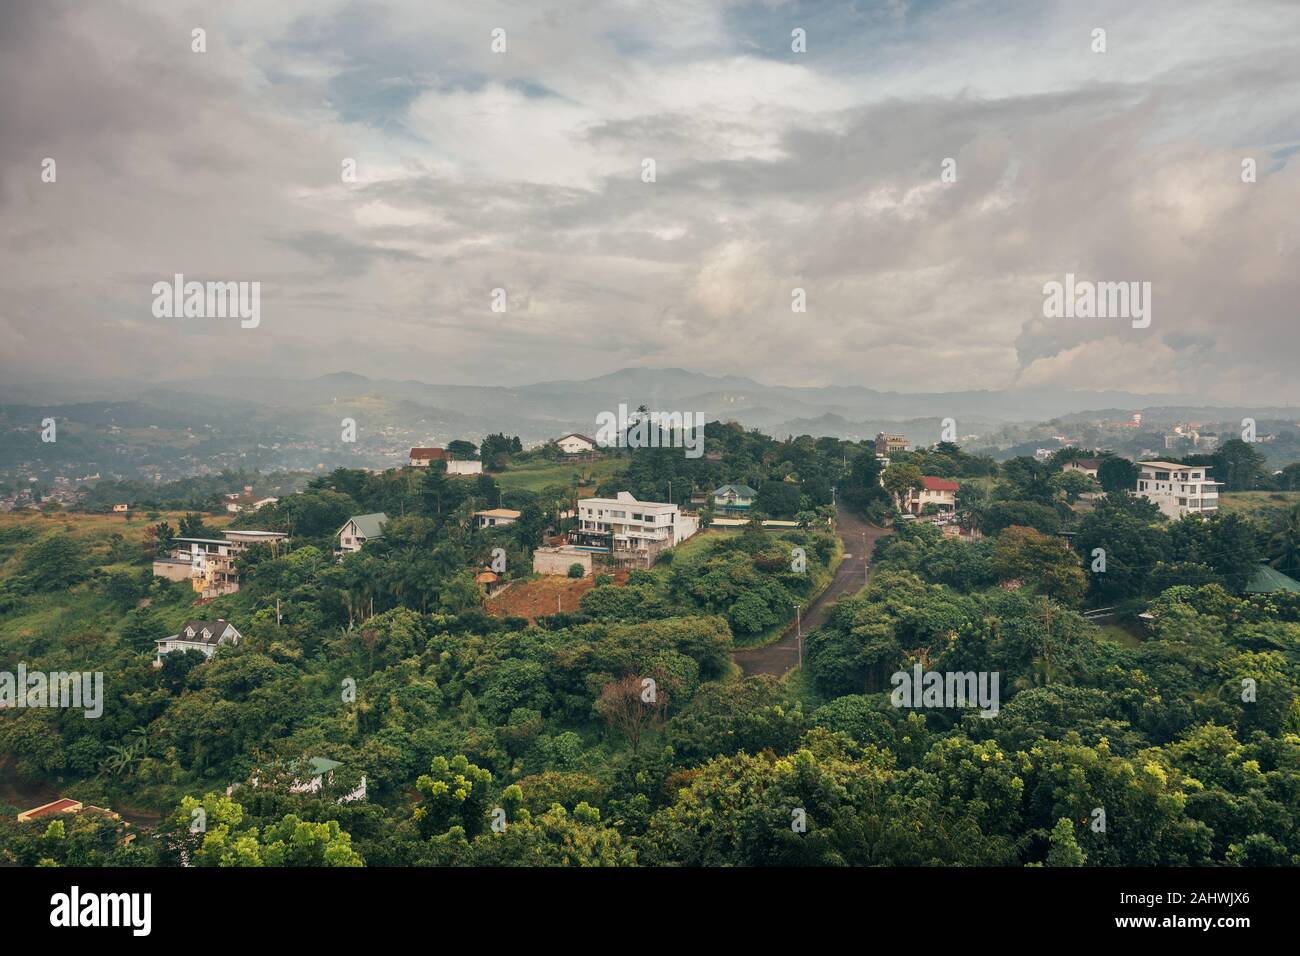 View from Cloud 9 360 View, in Antipolo, Rizal, Philippines Stock Photo